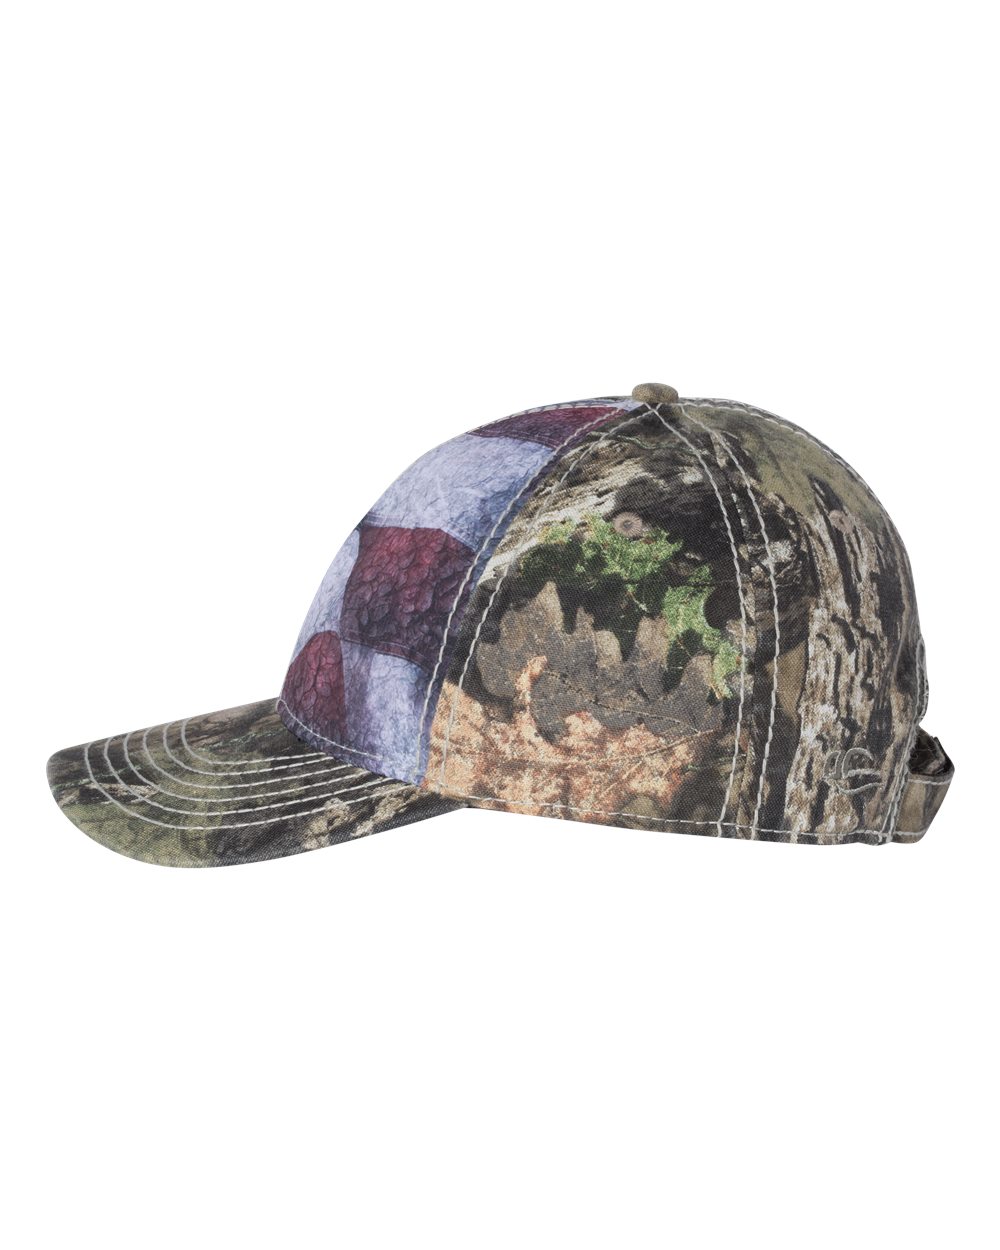 'Outdoor Cap SUS100 Camo Cap with Flag Sublimated Front Panels'